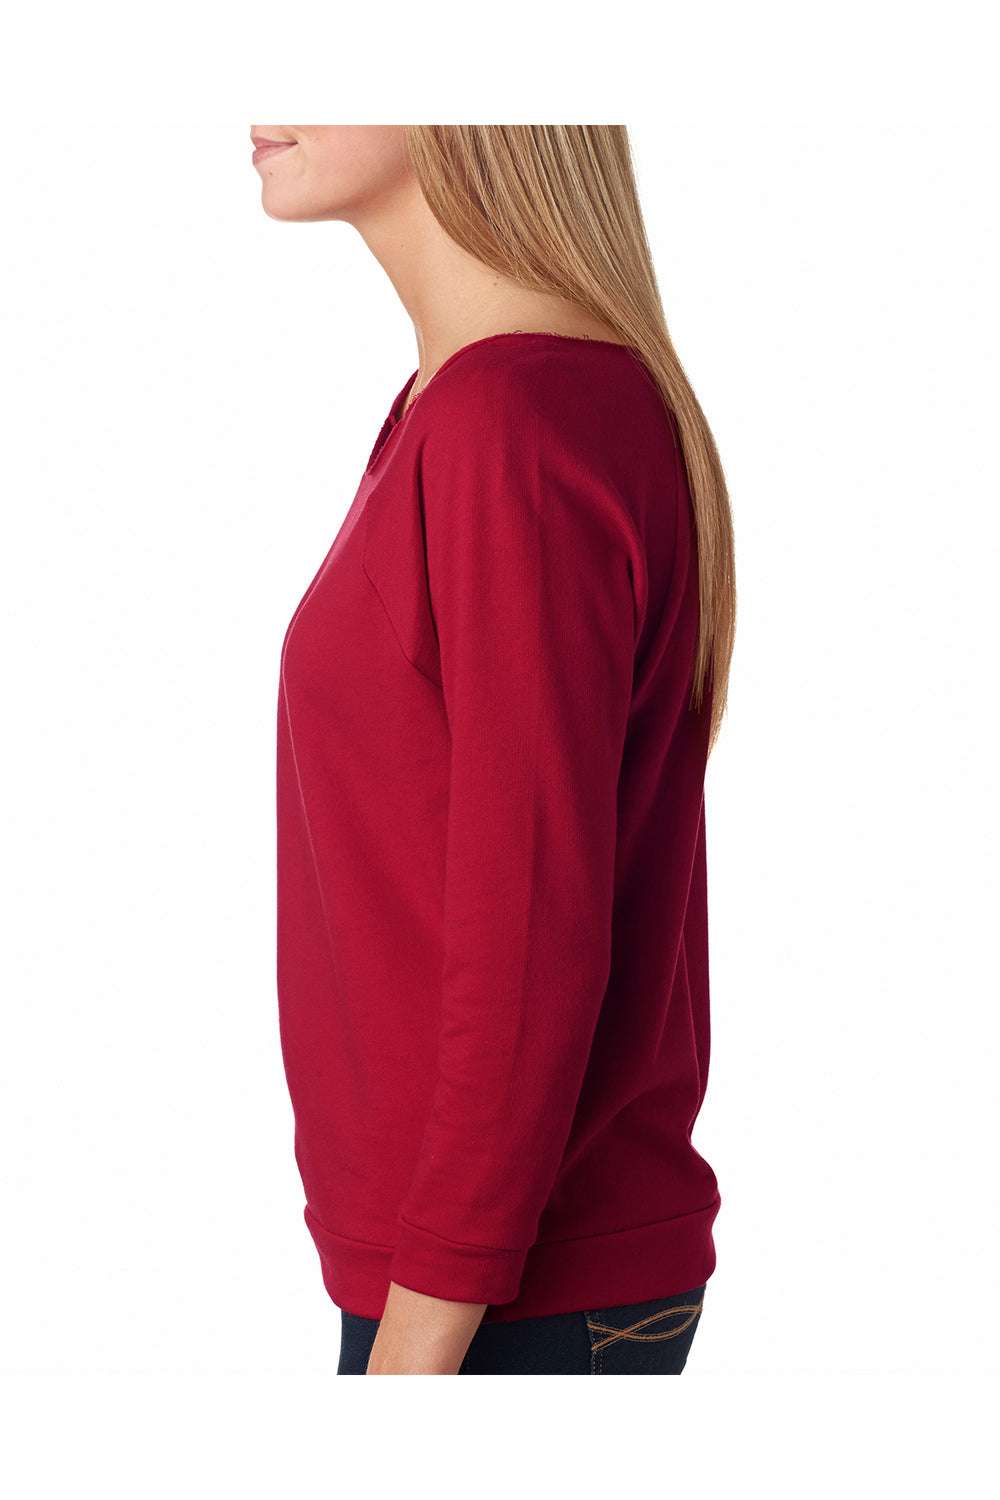 Next Level 6951 Womens French Terry 3/4 Sleeve Wide Neck T-Shirt Scarlet Red Side